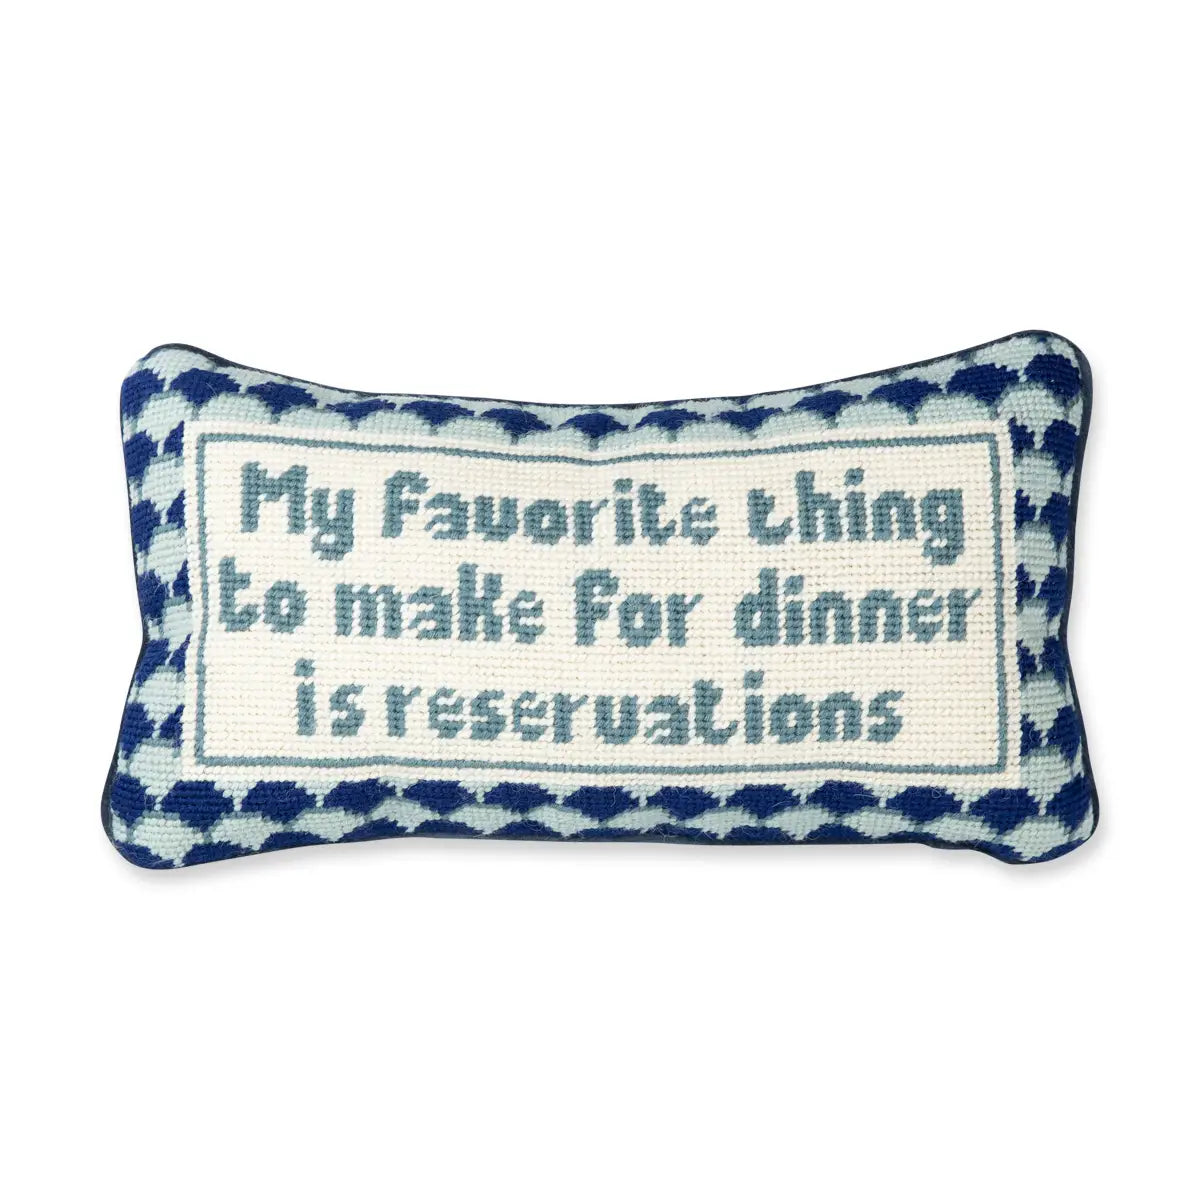 My Favorite Thing Needlepoint Pillow